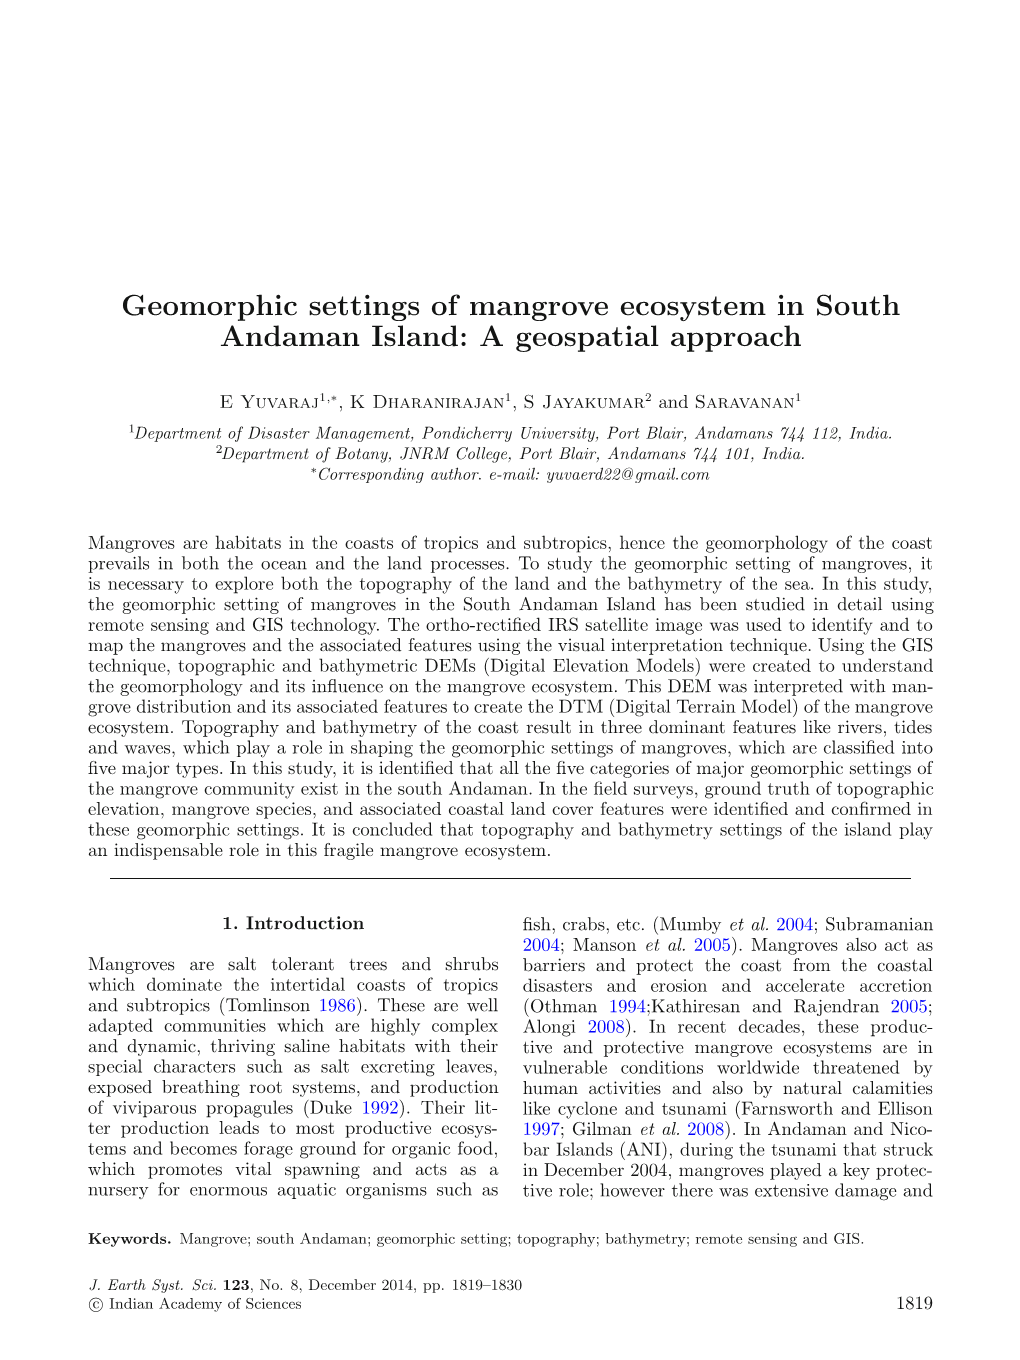 Geomorphic Settings of Mangrove Ecosystem in South Andaman Island: a Geospatial Approach